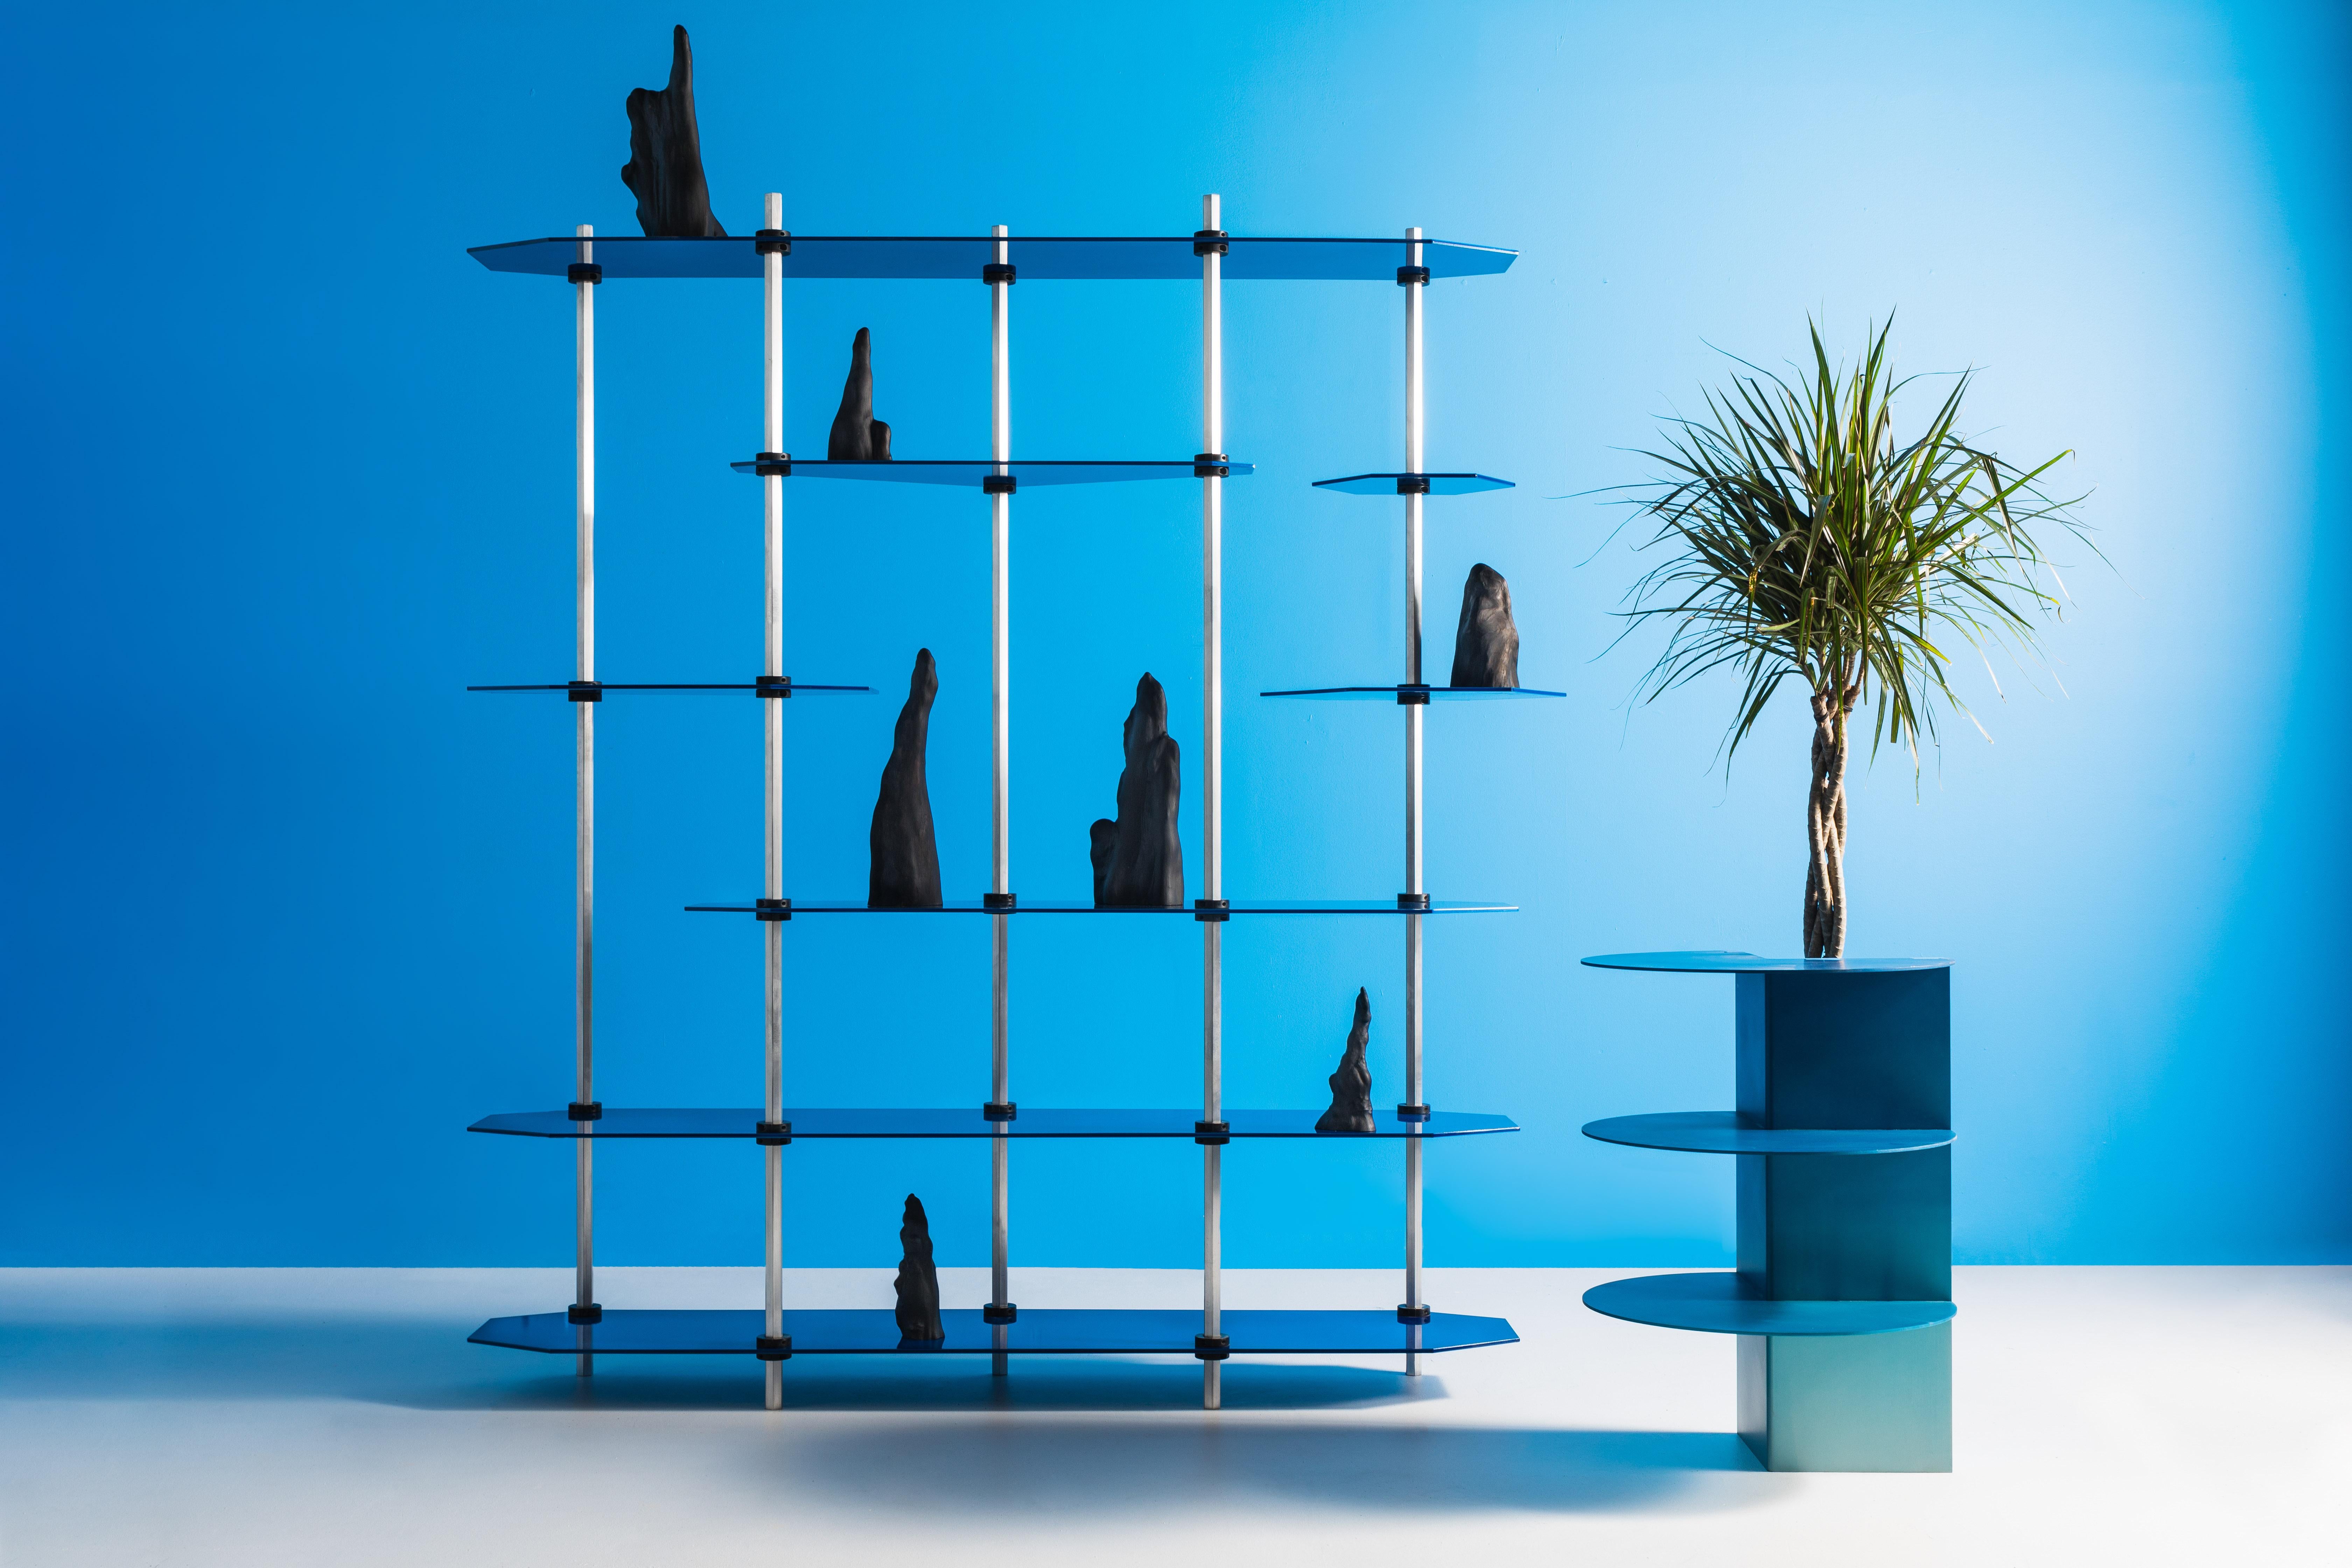 Designed entirely around standard factory-made “shaft collars” which clamp onto the posts to secure the shelves, the Hex Shelving system is easily assembled with nothing more than an allen key. A wide variety of shelf shapes and support sizes are